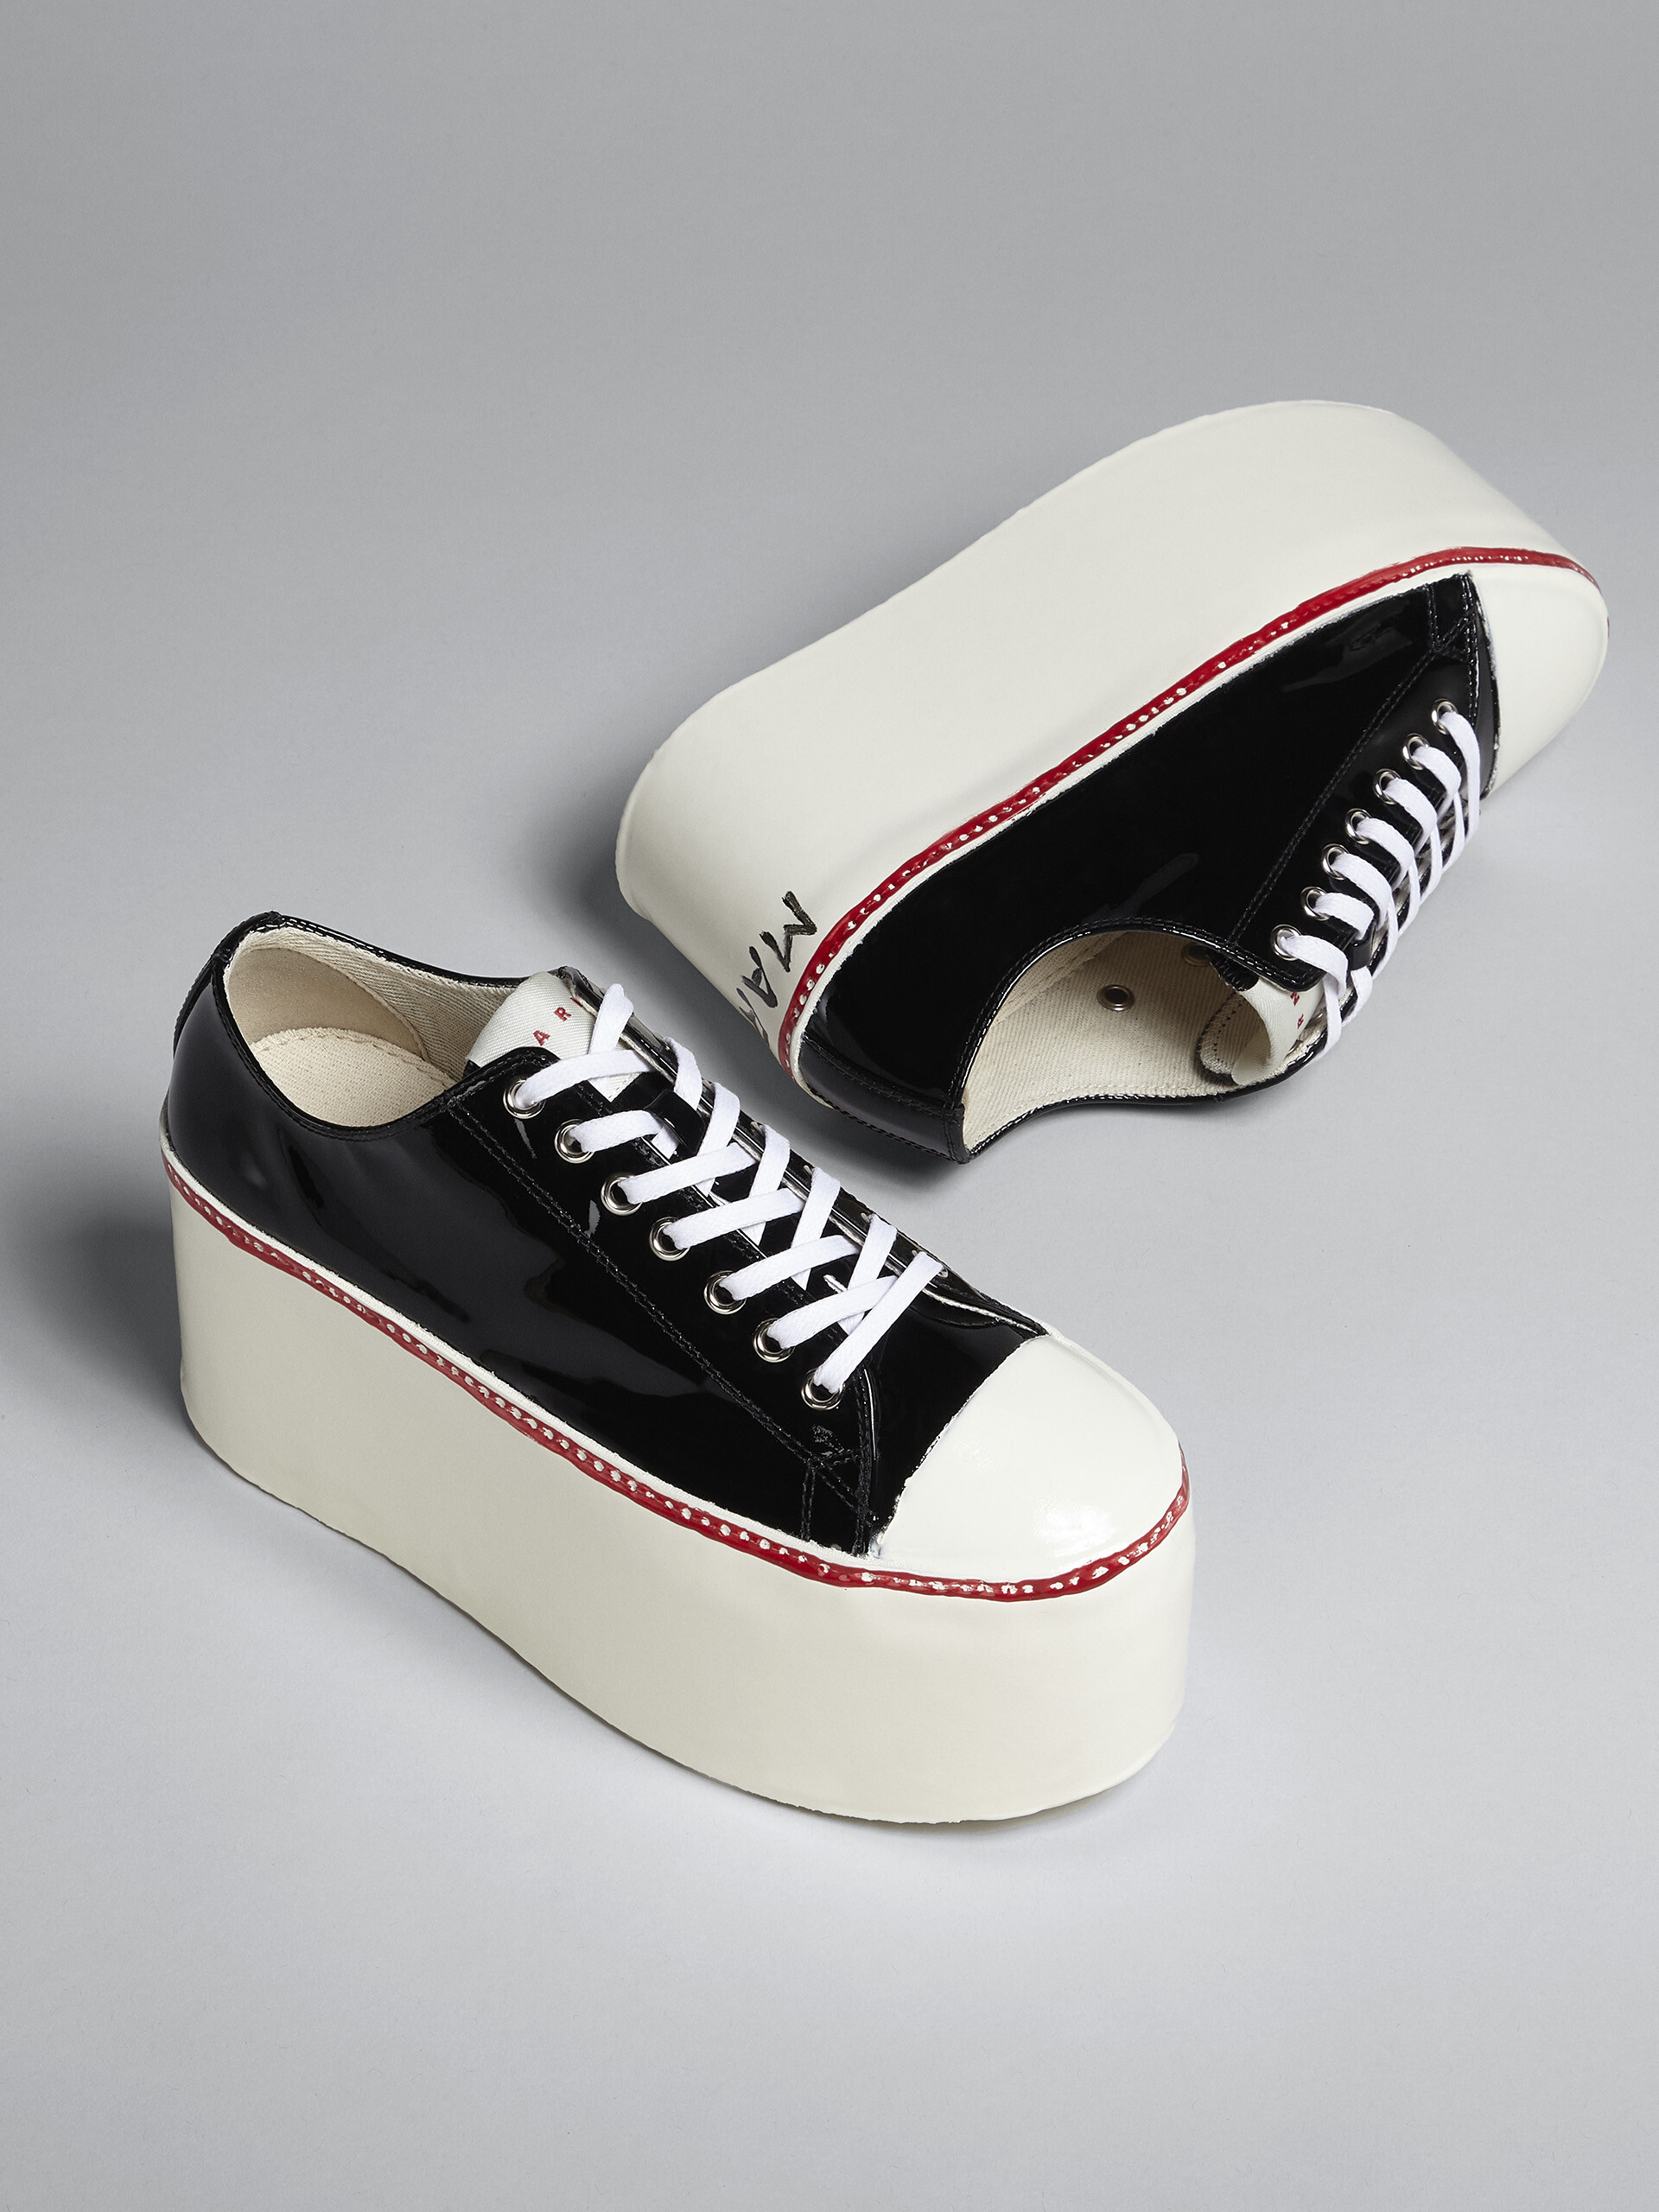 Patent leather platform sneaker - Sneakers - Image 5